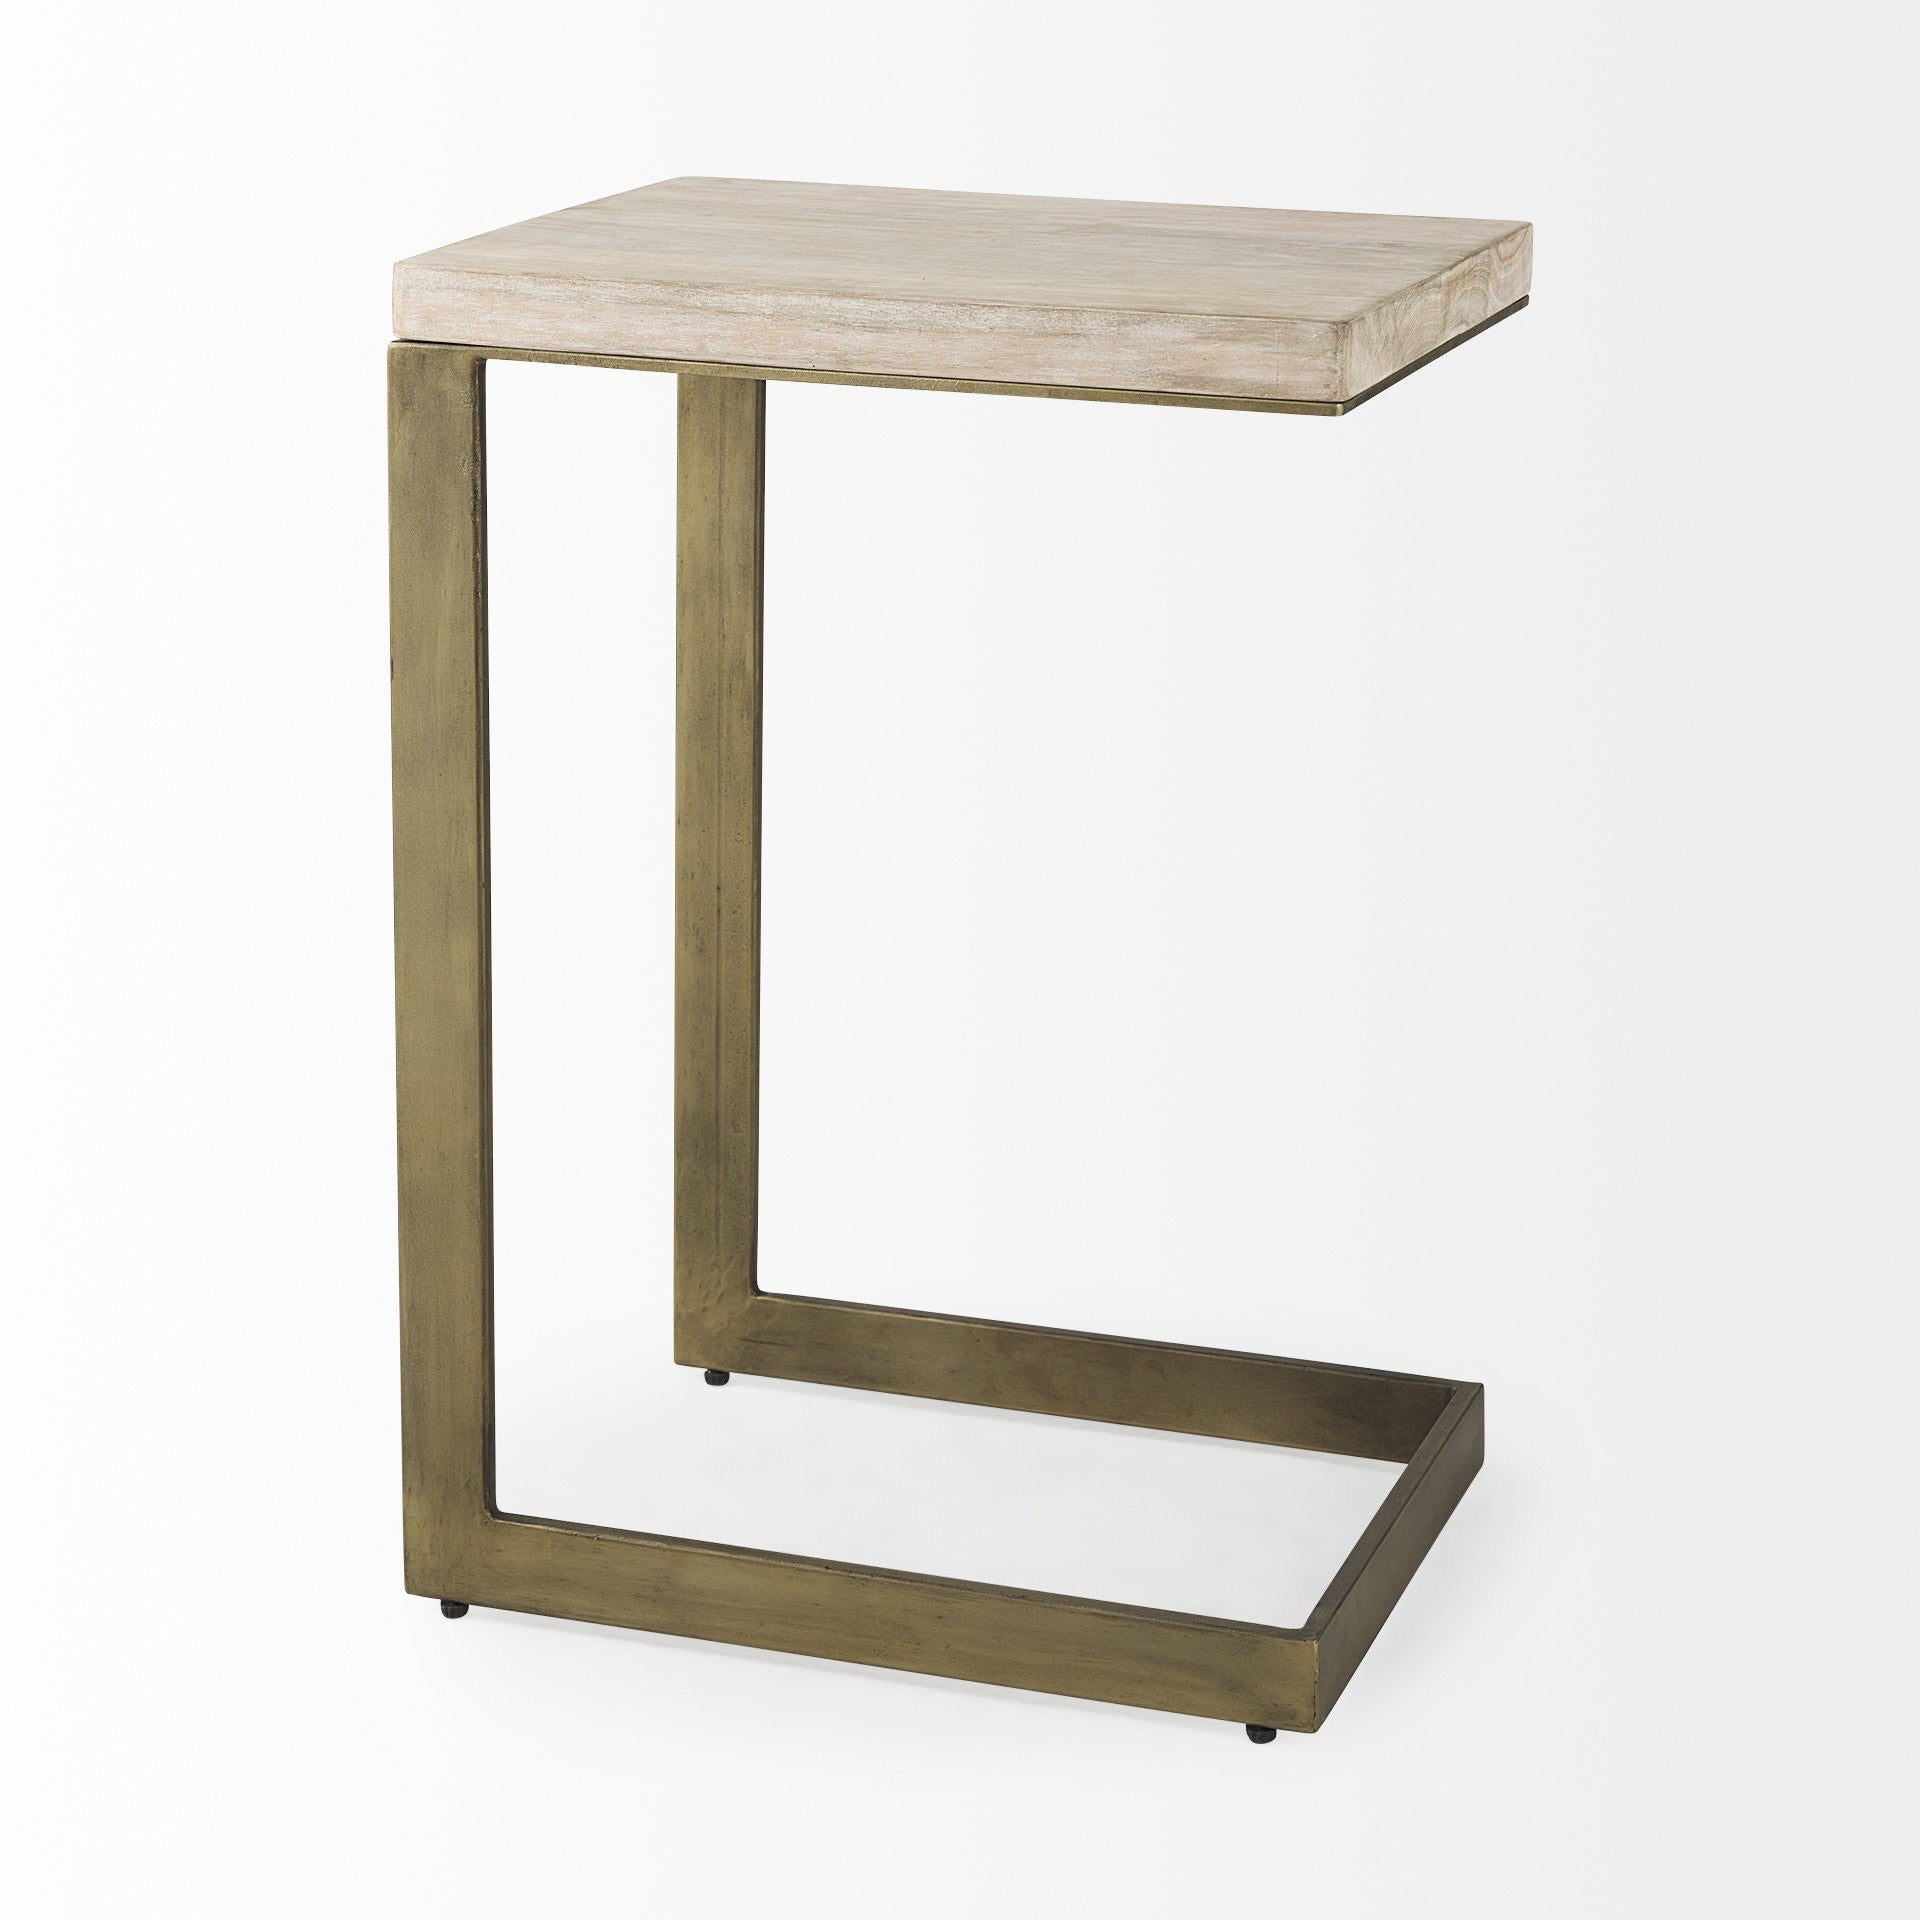 26" Beige Solid Wood Square End Table